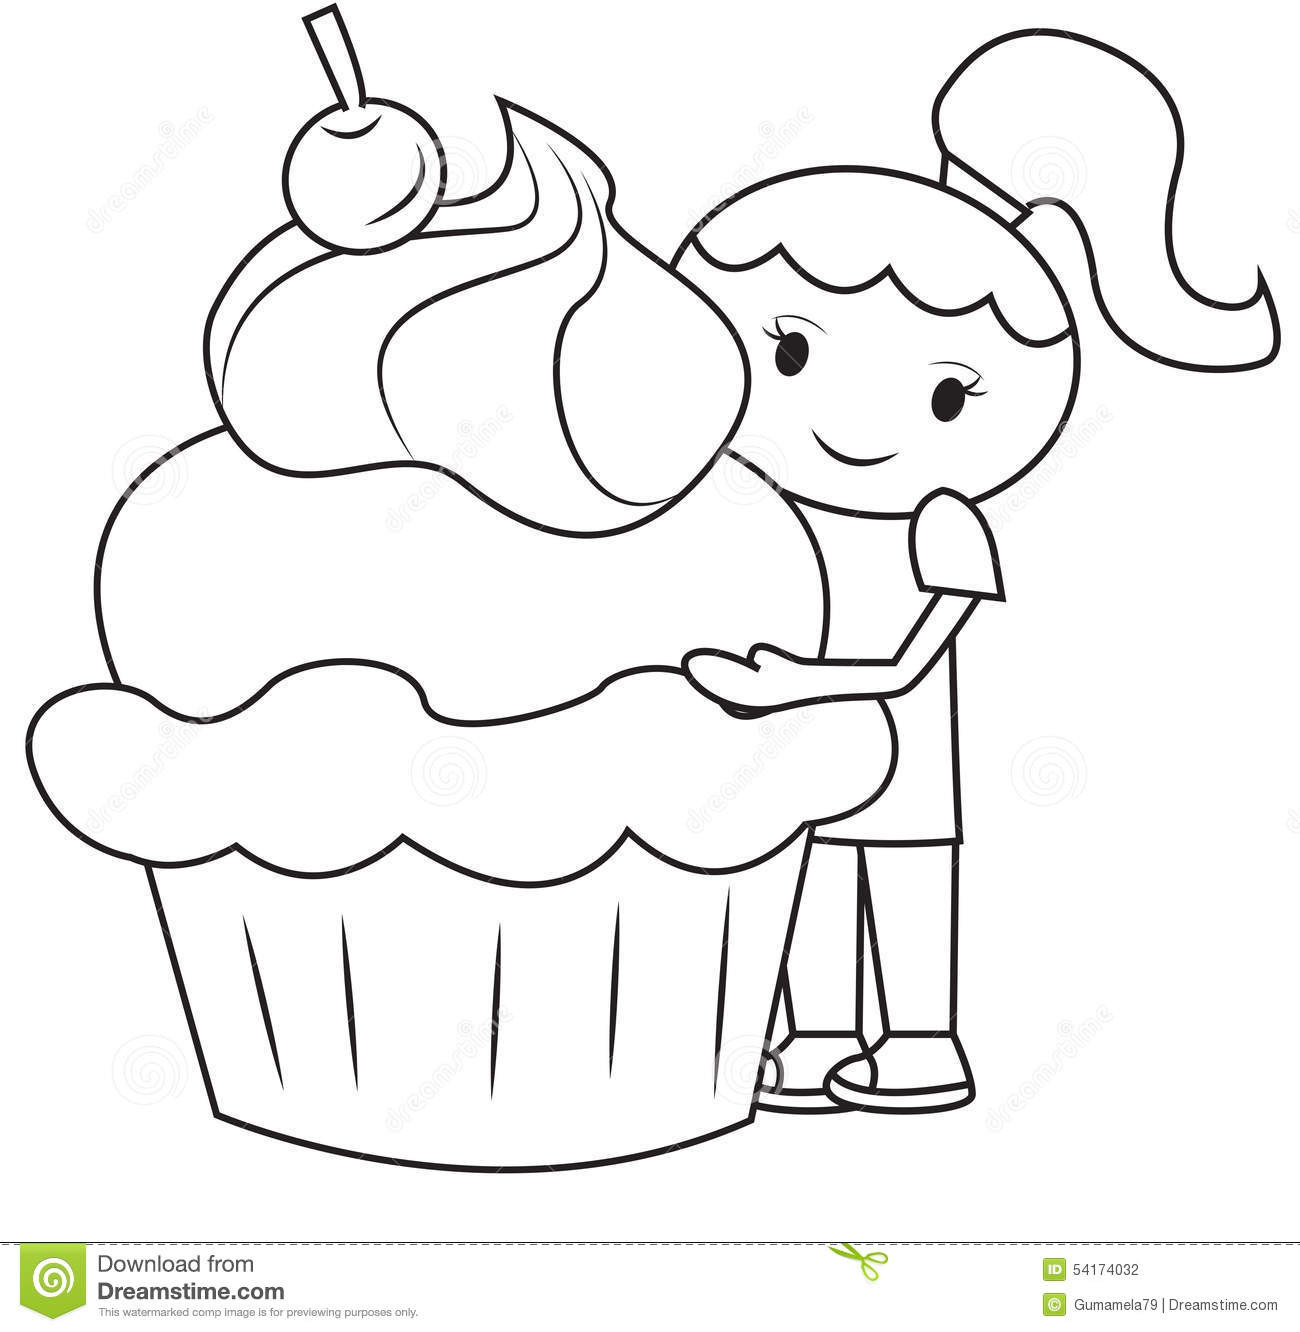 Coloring Pages For Big Kids
 The Girl And The Big Cupcake Coloring Page Stock